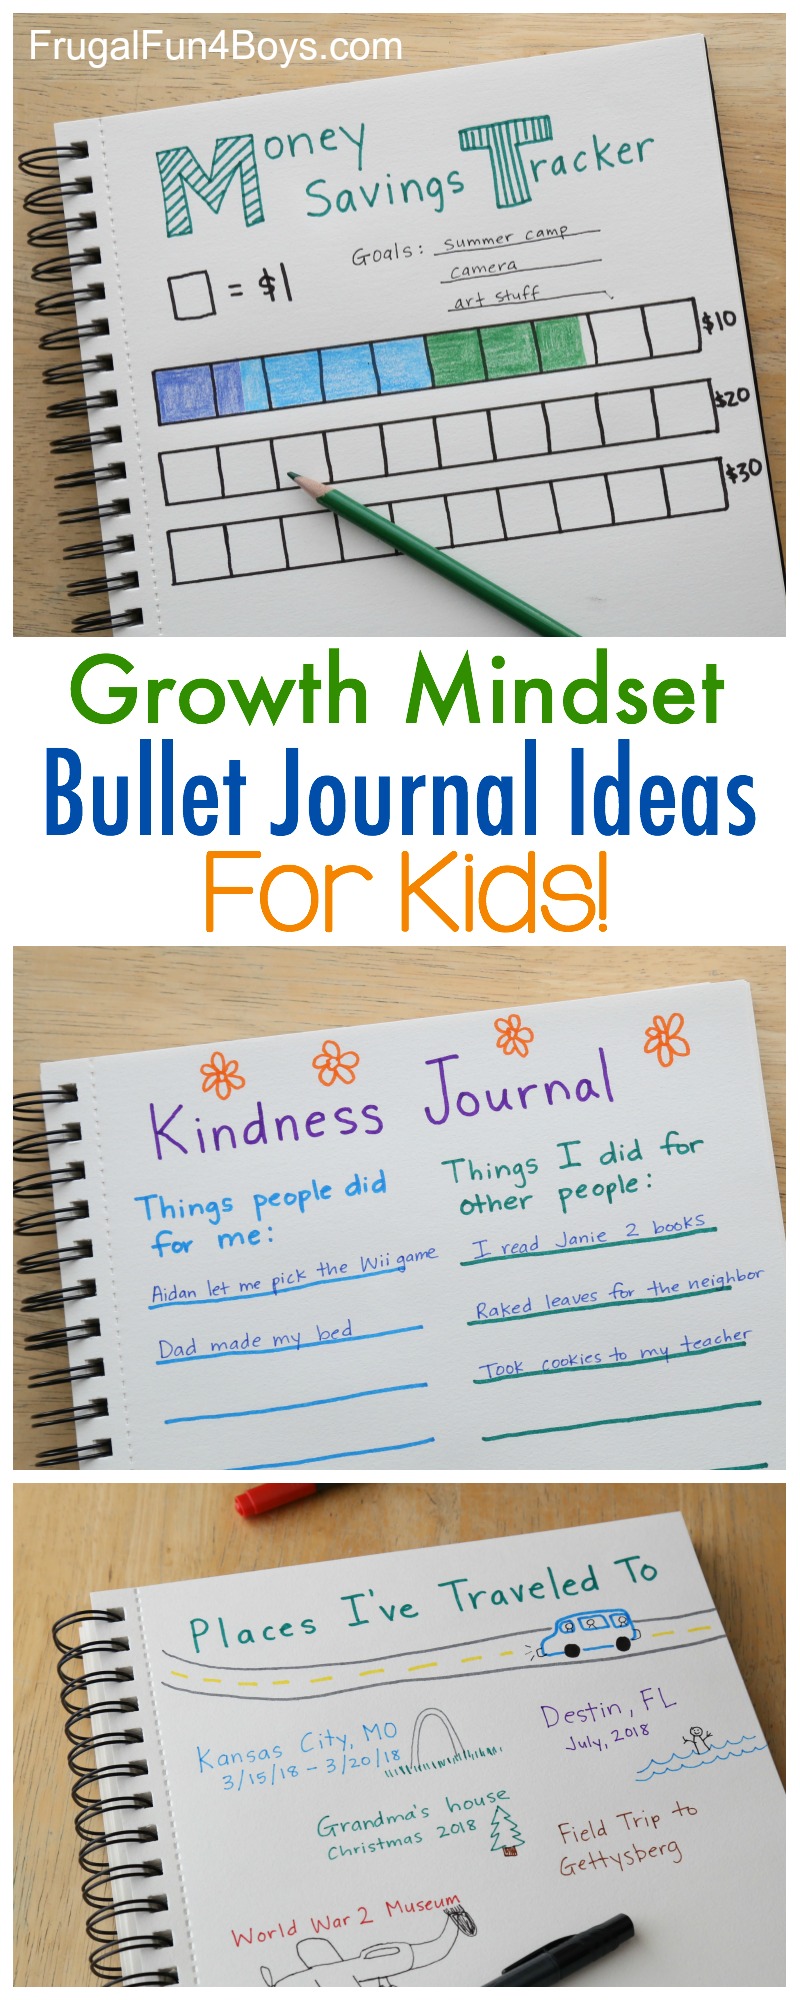 Growth Mindset Bullet Journal Ideas for Kids - Frugal Fun For Boys and Girls